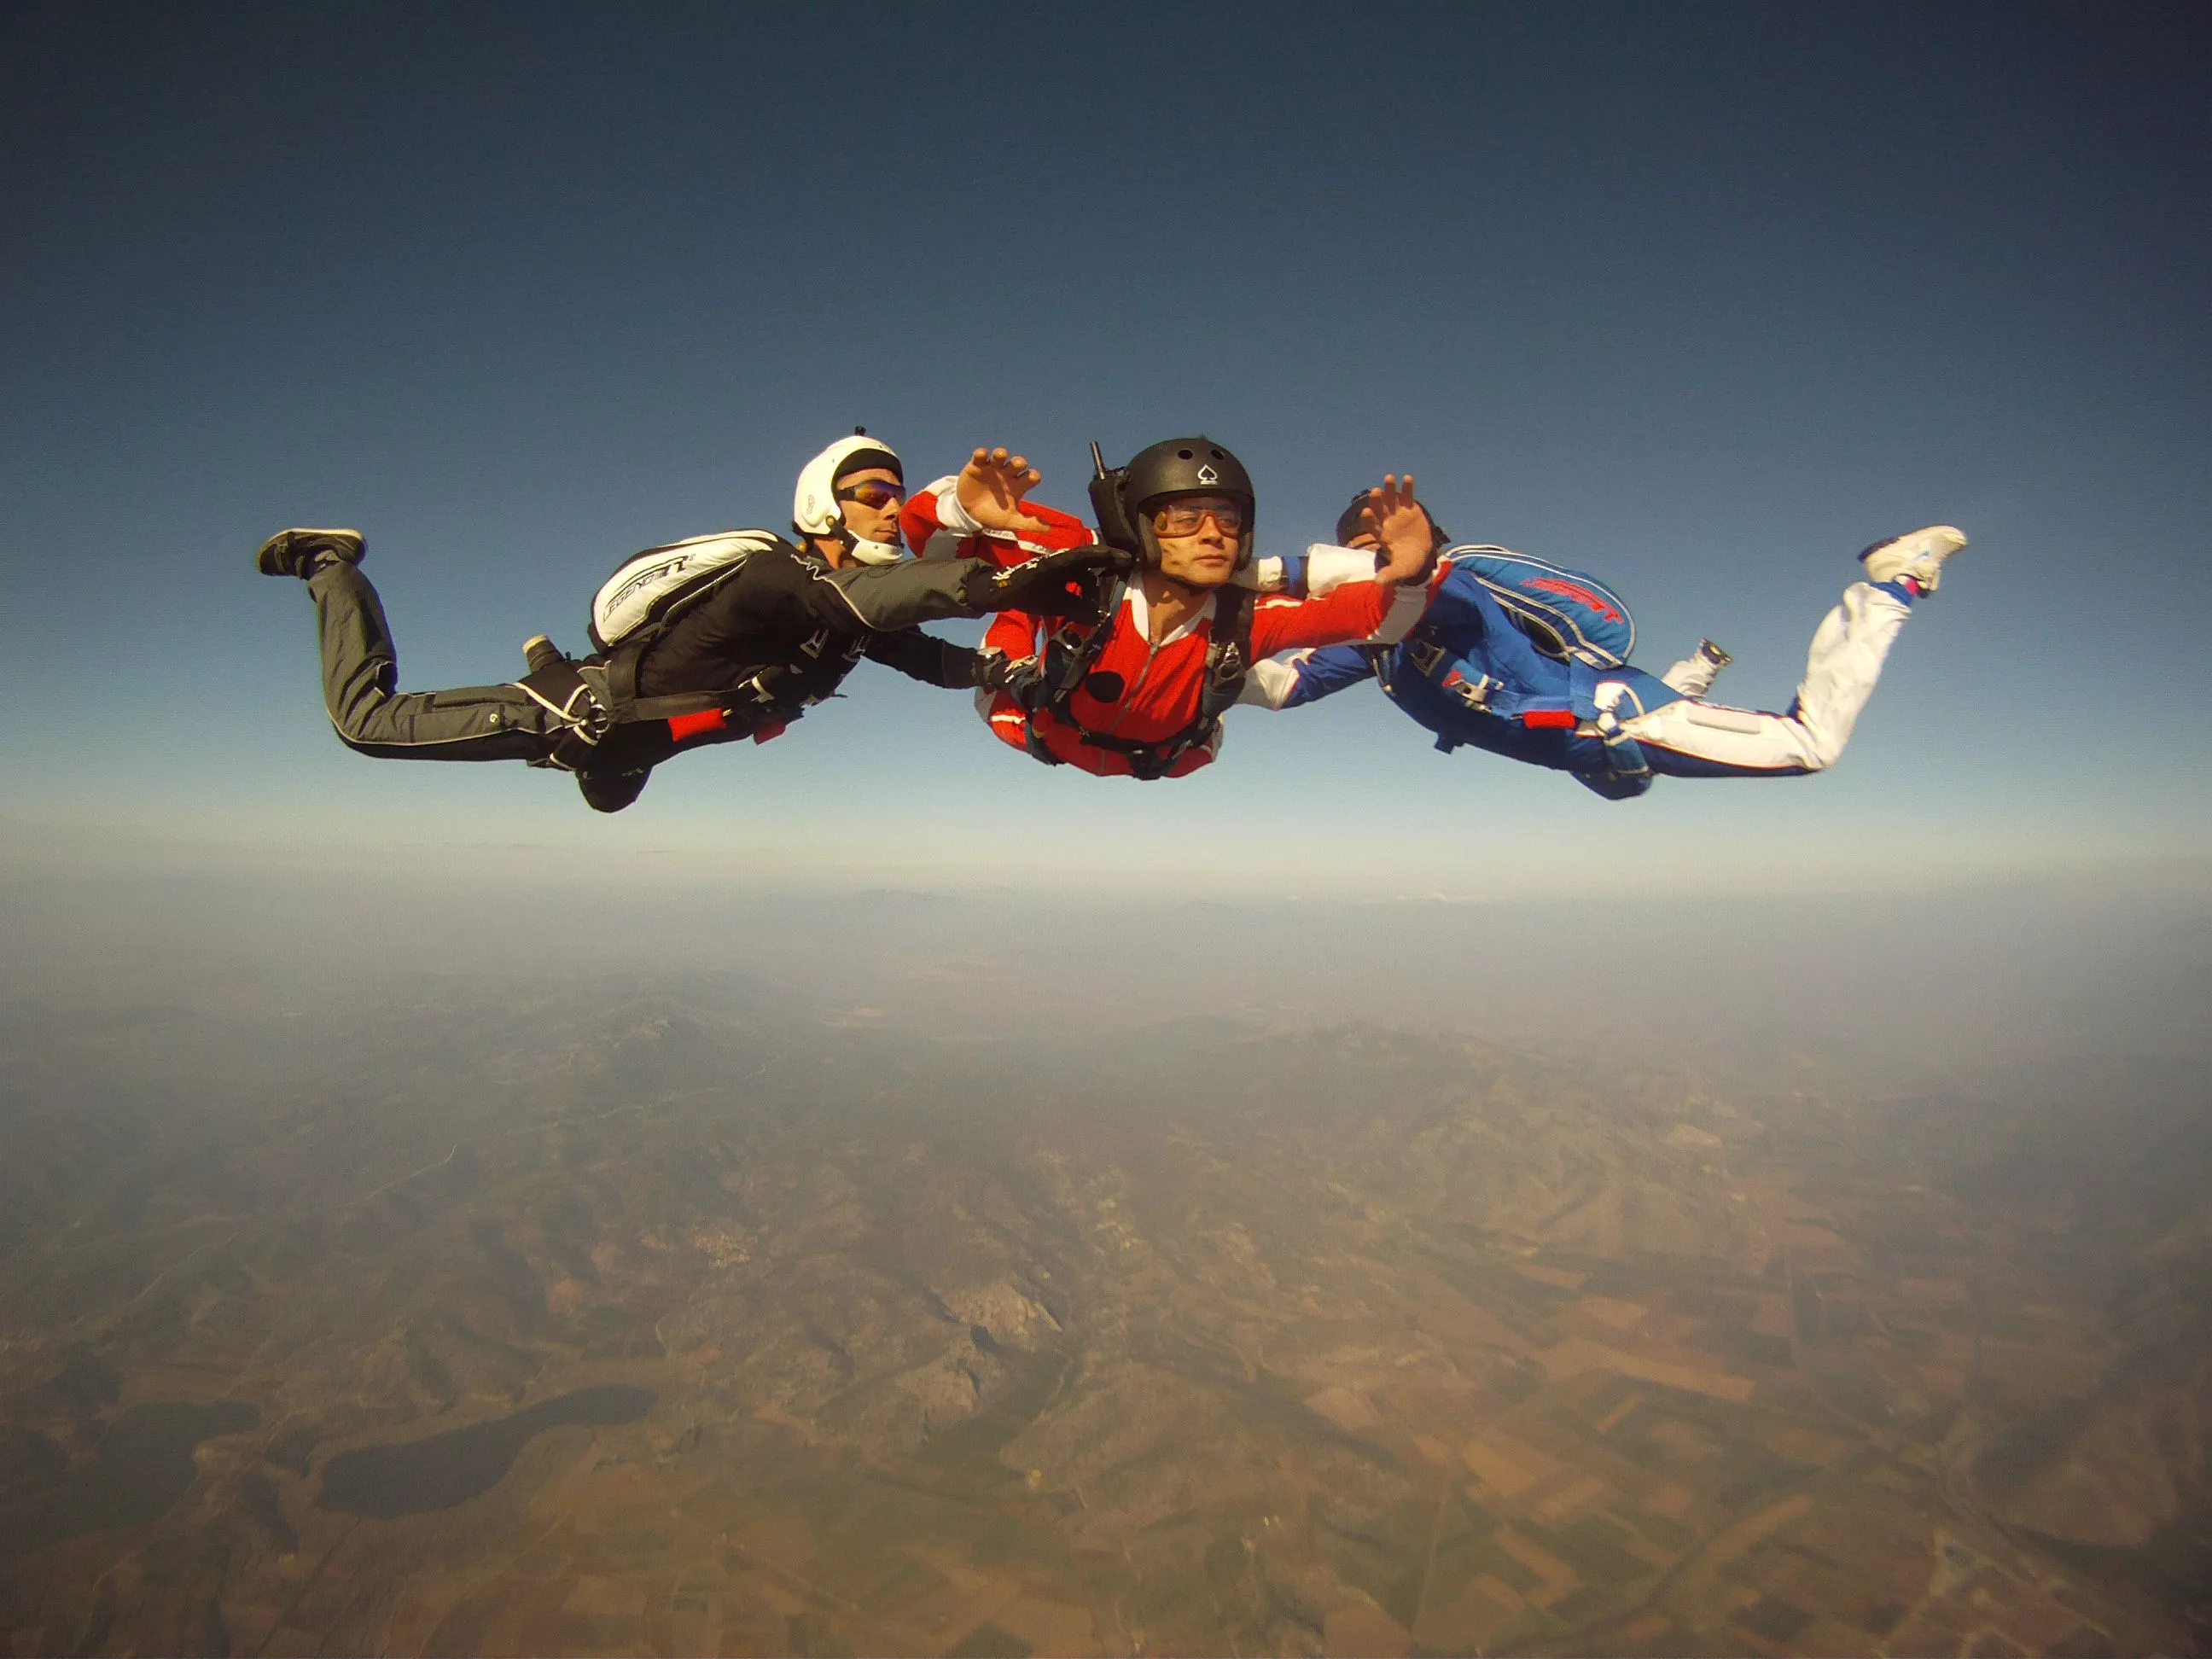 Skydive Ephesus in Turkey, Central Asia | Skydiving - Rated 0.8